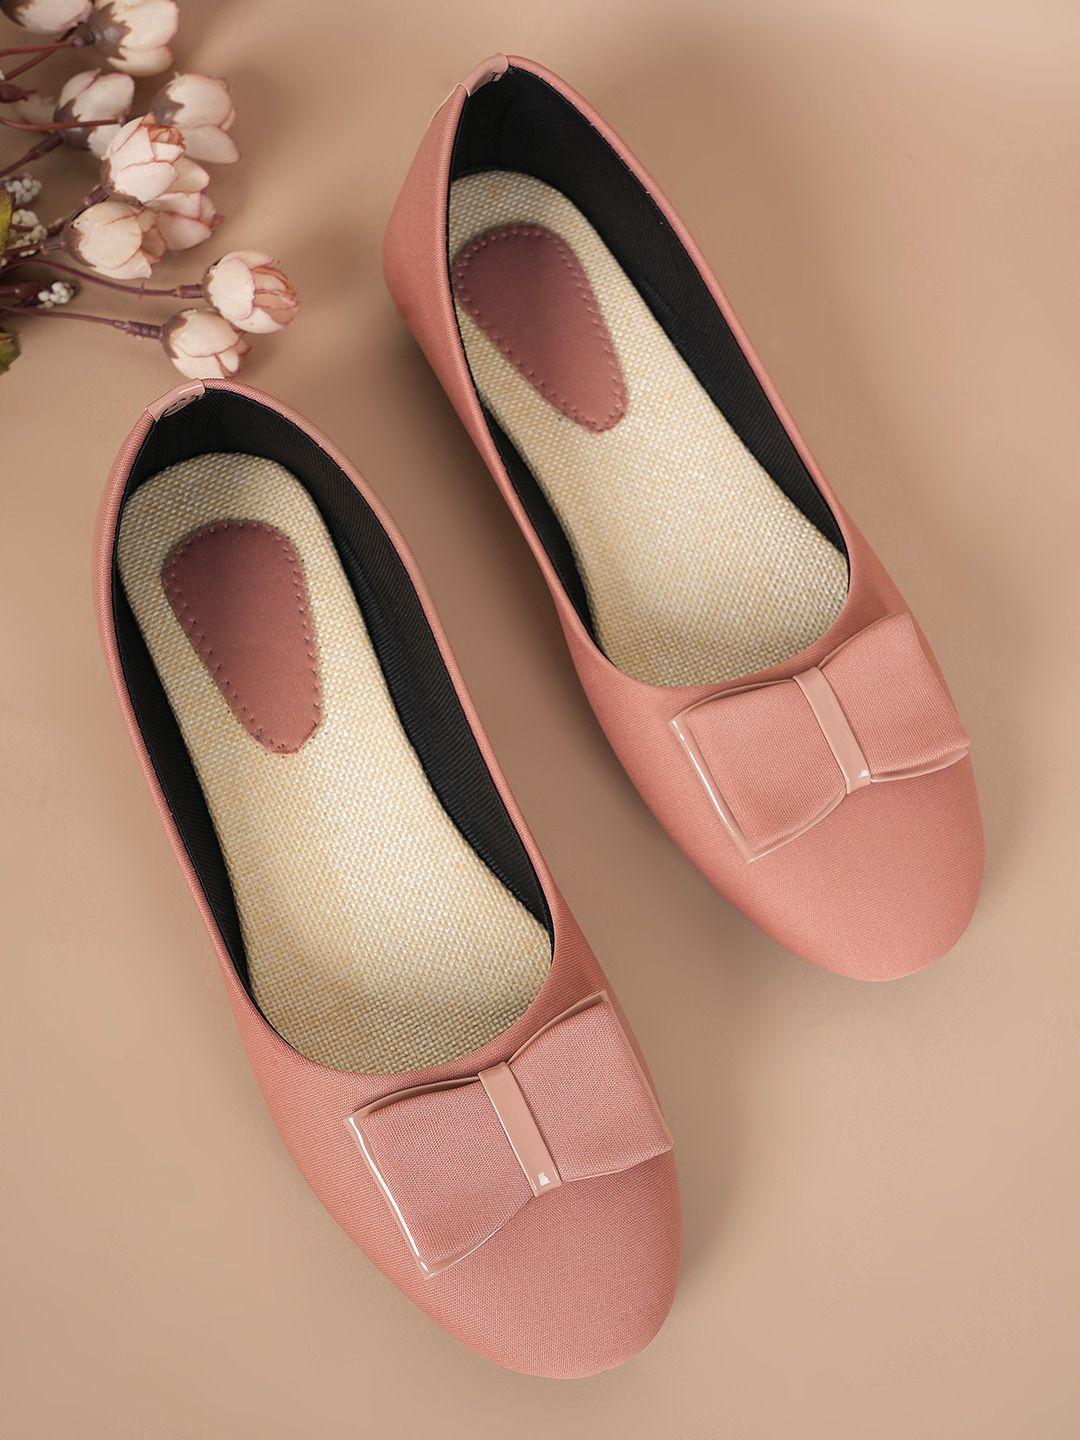 style shoes bow detail round toe ballerinas